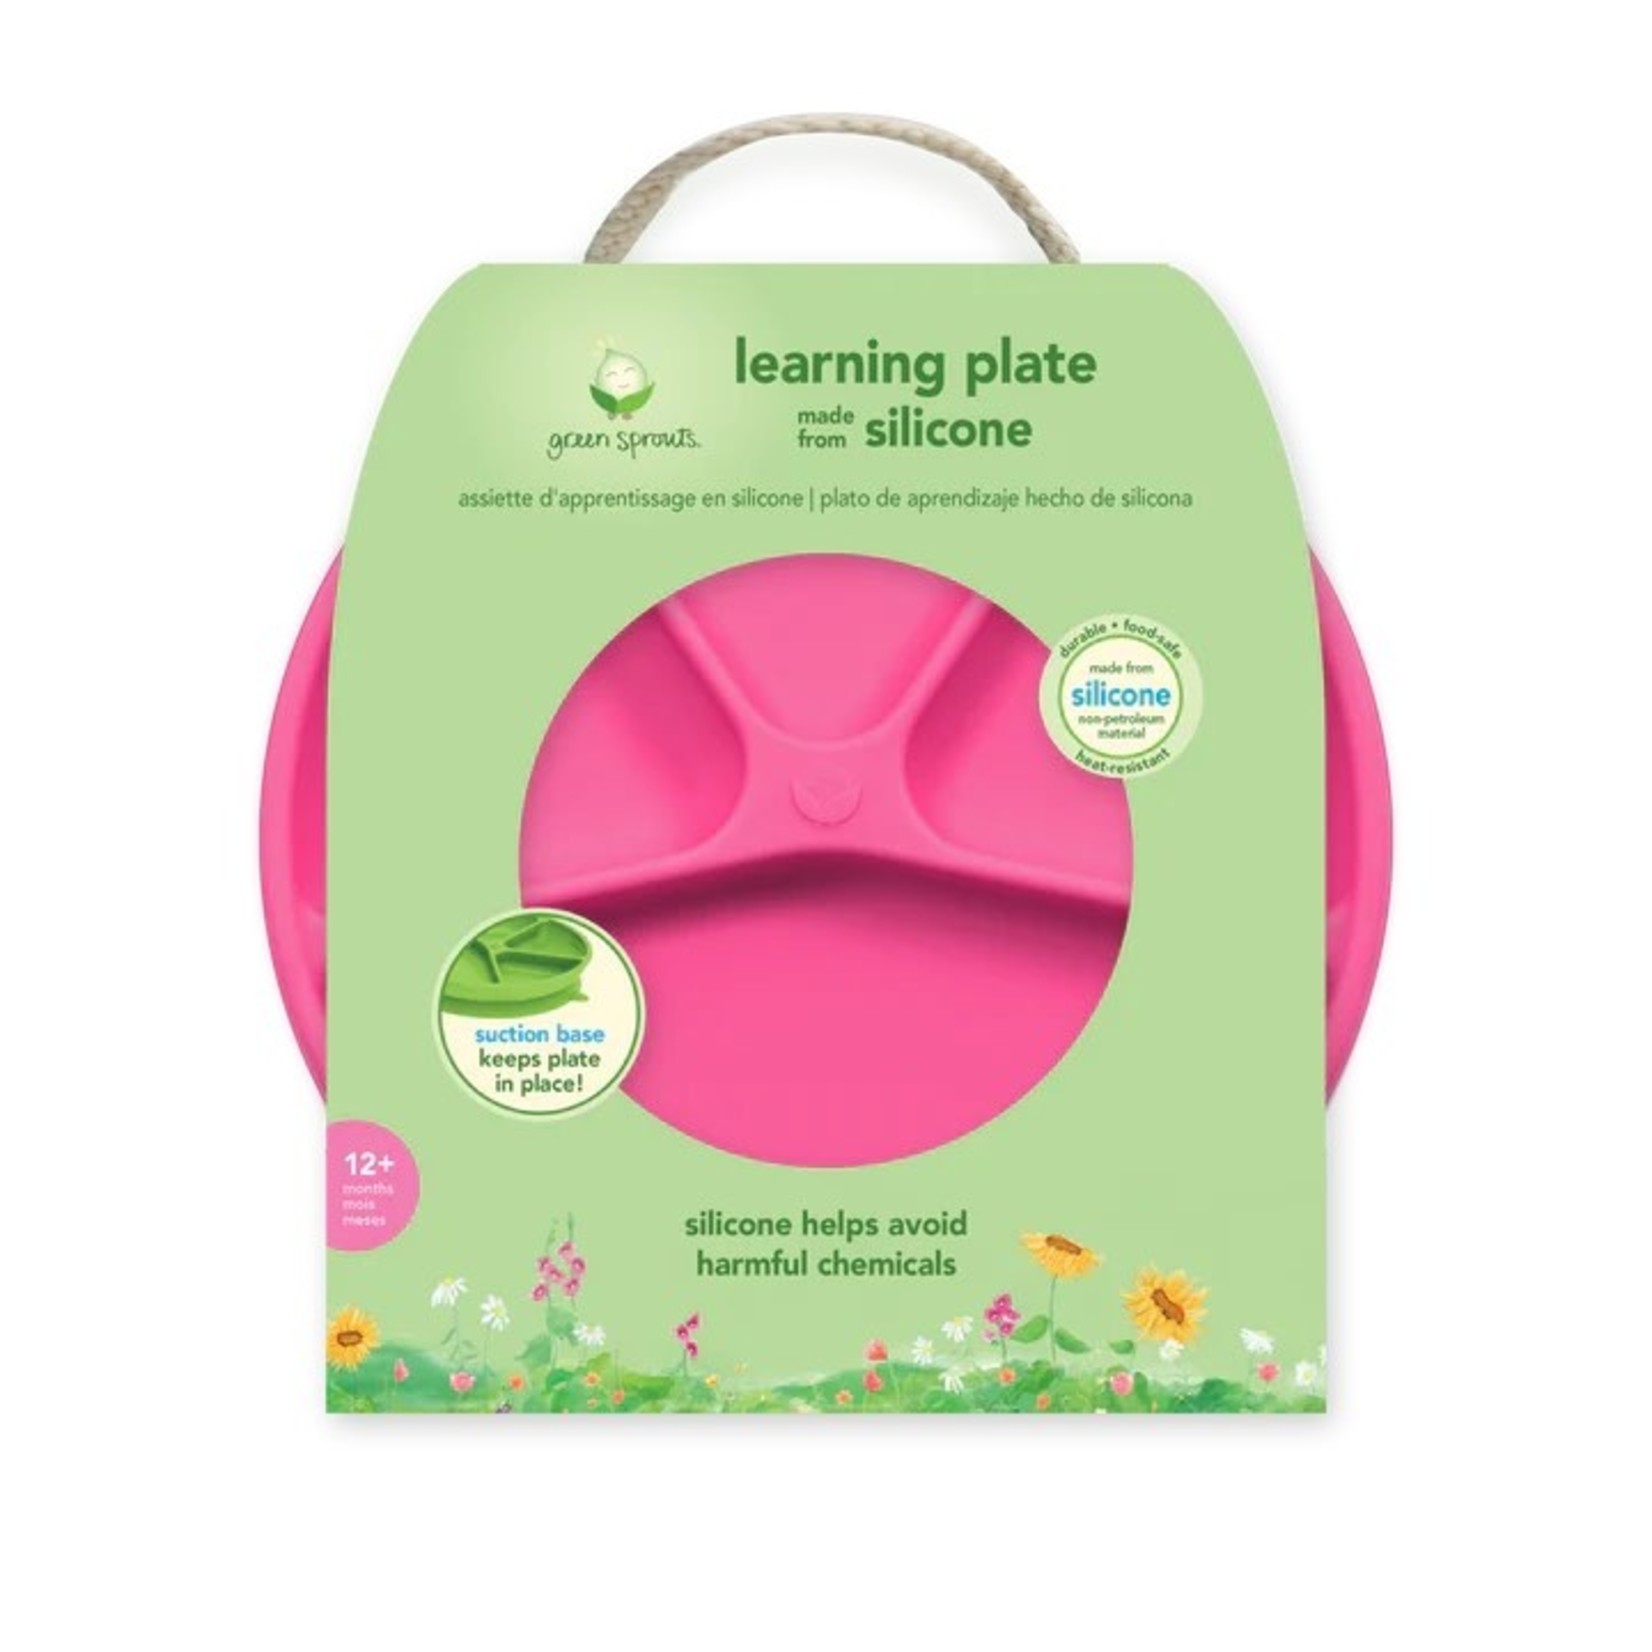 Green Sprouts Learning Plate Pink